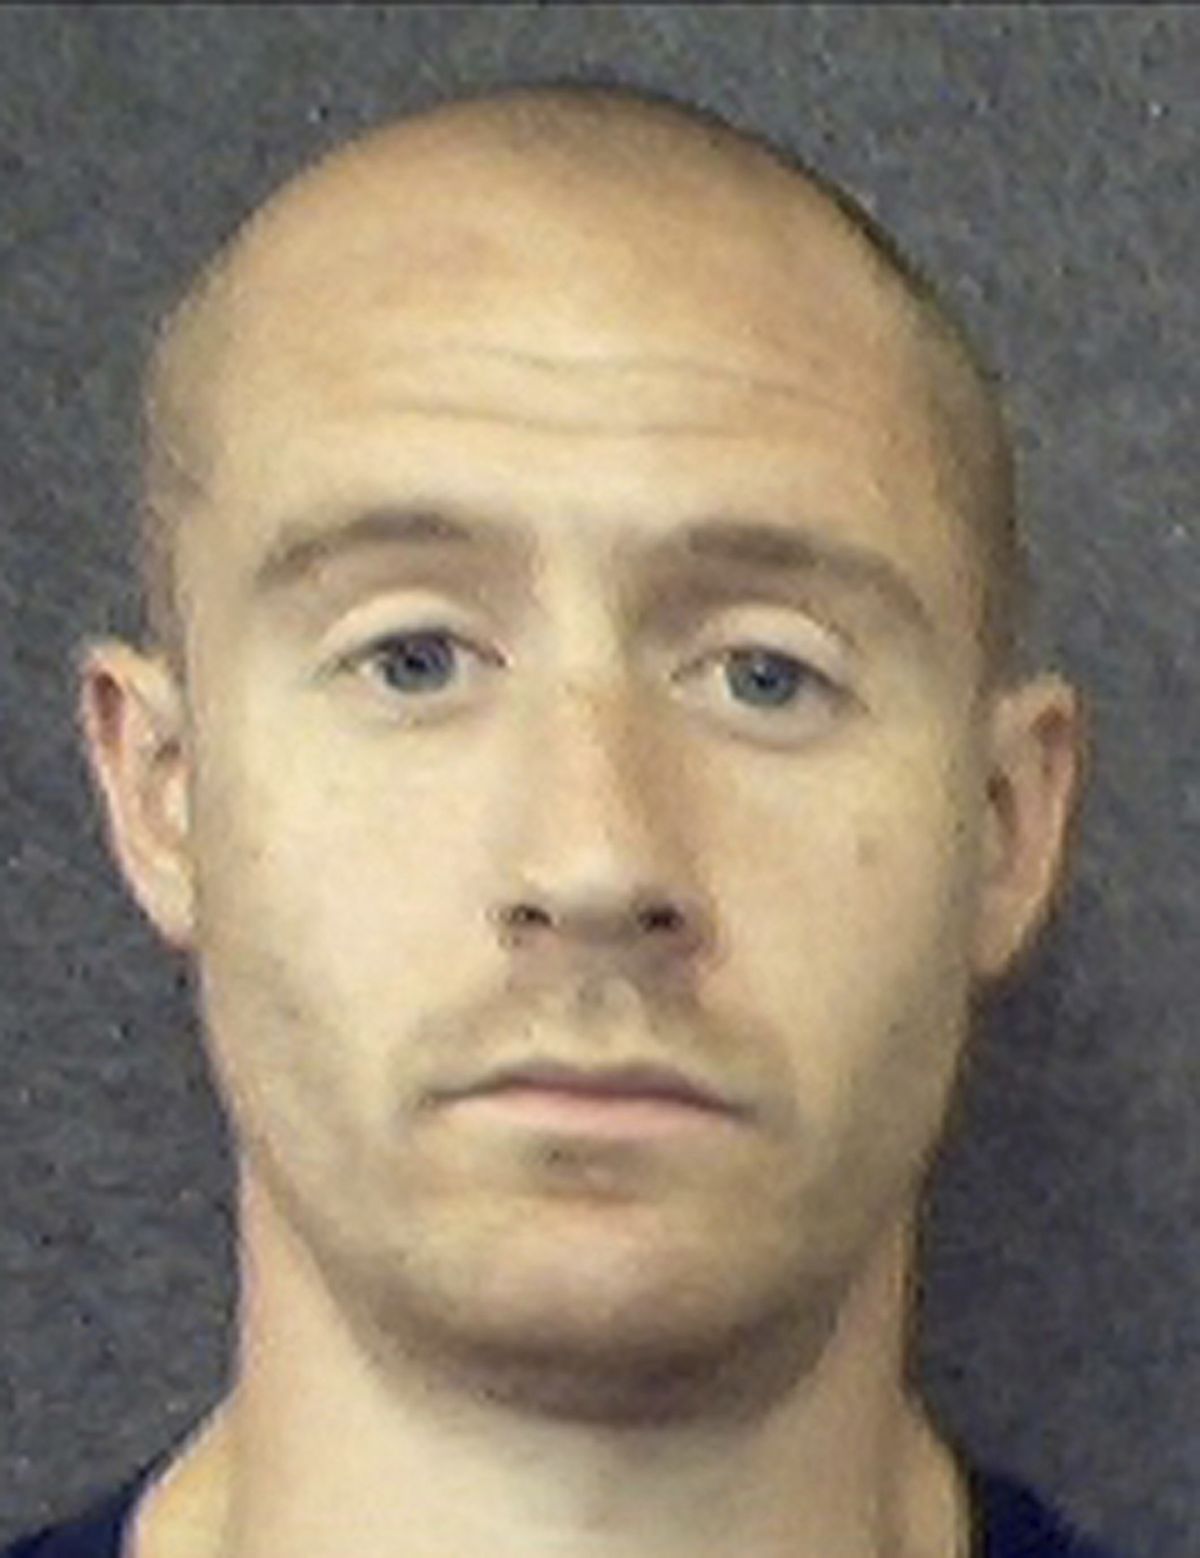  This undated file photo provided by the Oregon Department of Corrections show Kip Kinkel. Kip Kinkel, who killed his parents before going on a shooting rampage at his Oregon high school in 1998, killing two classmates and injuring 25 more, has given his first news interview, telling HuffPost he feels “tremendous, tremendous shame and guilt.”  (HOGP)